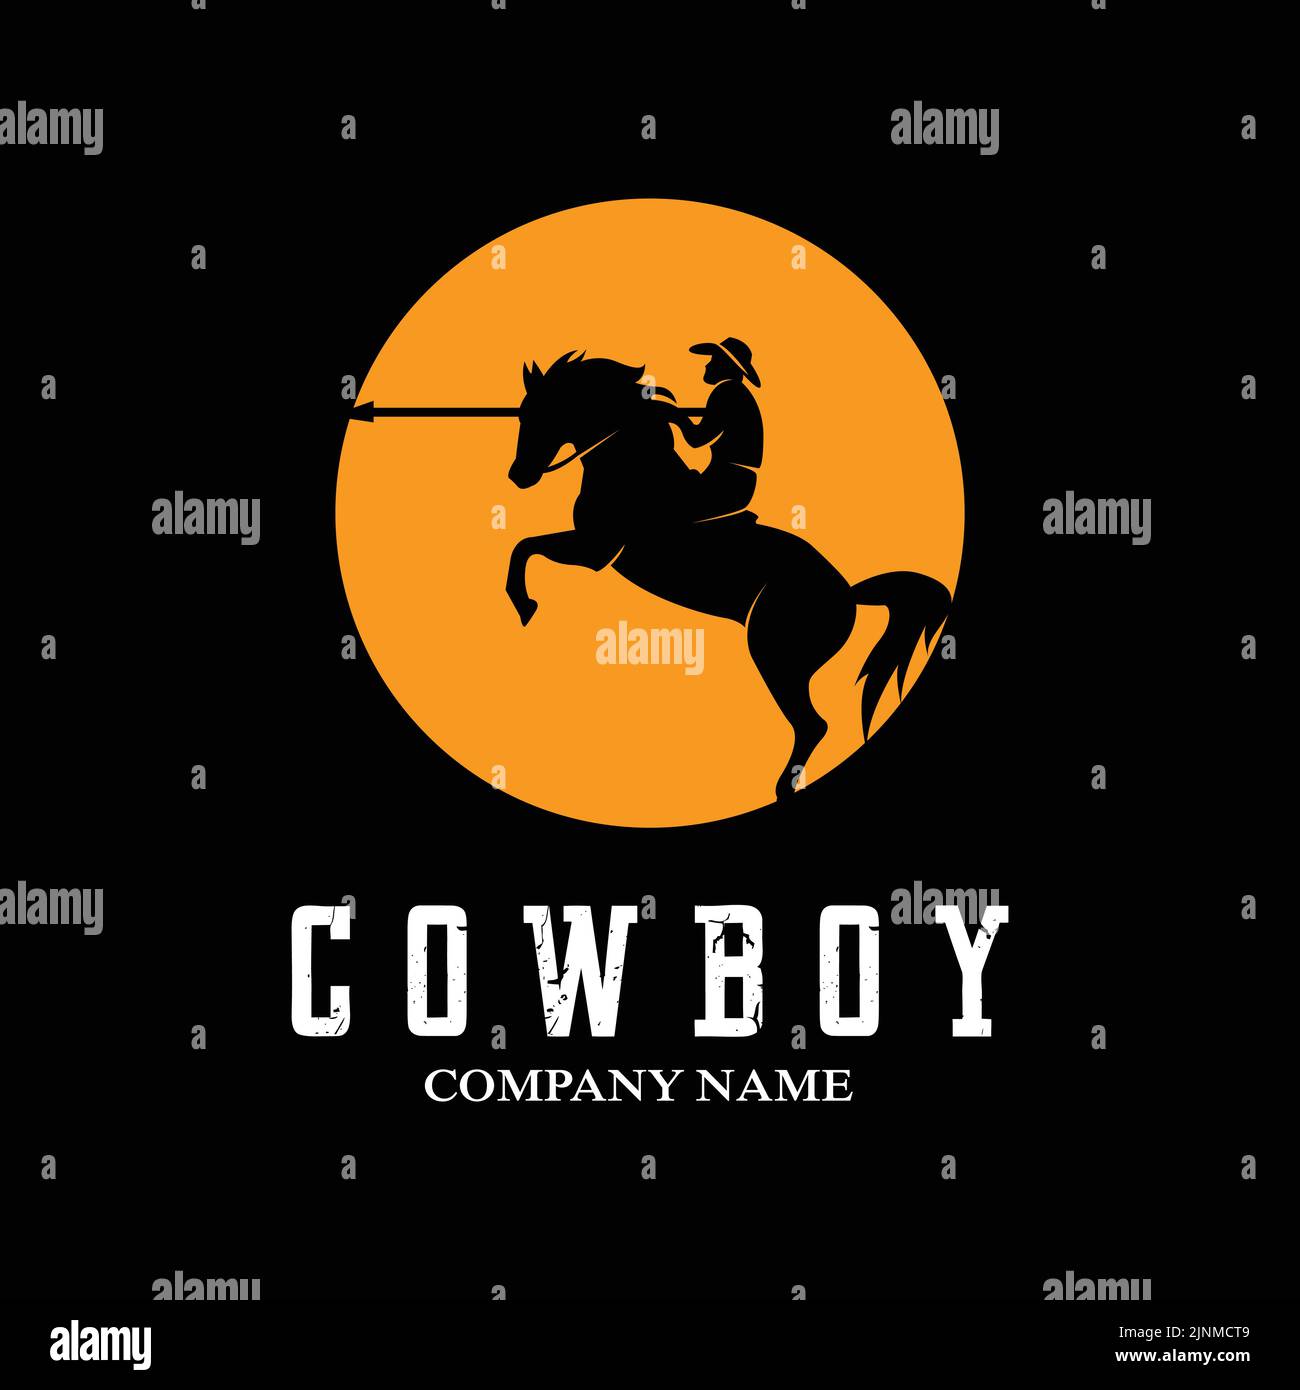 Cowboy Man Riding Horse Powerfully Silhouette at Sunset, icon logo design Stock Vector